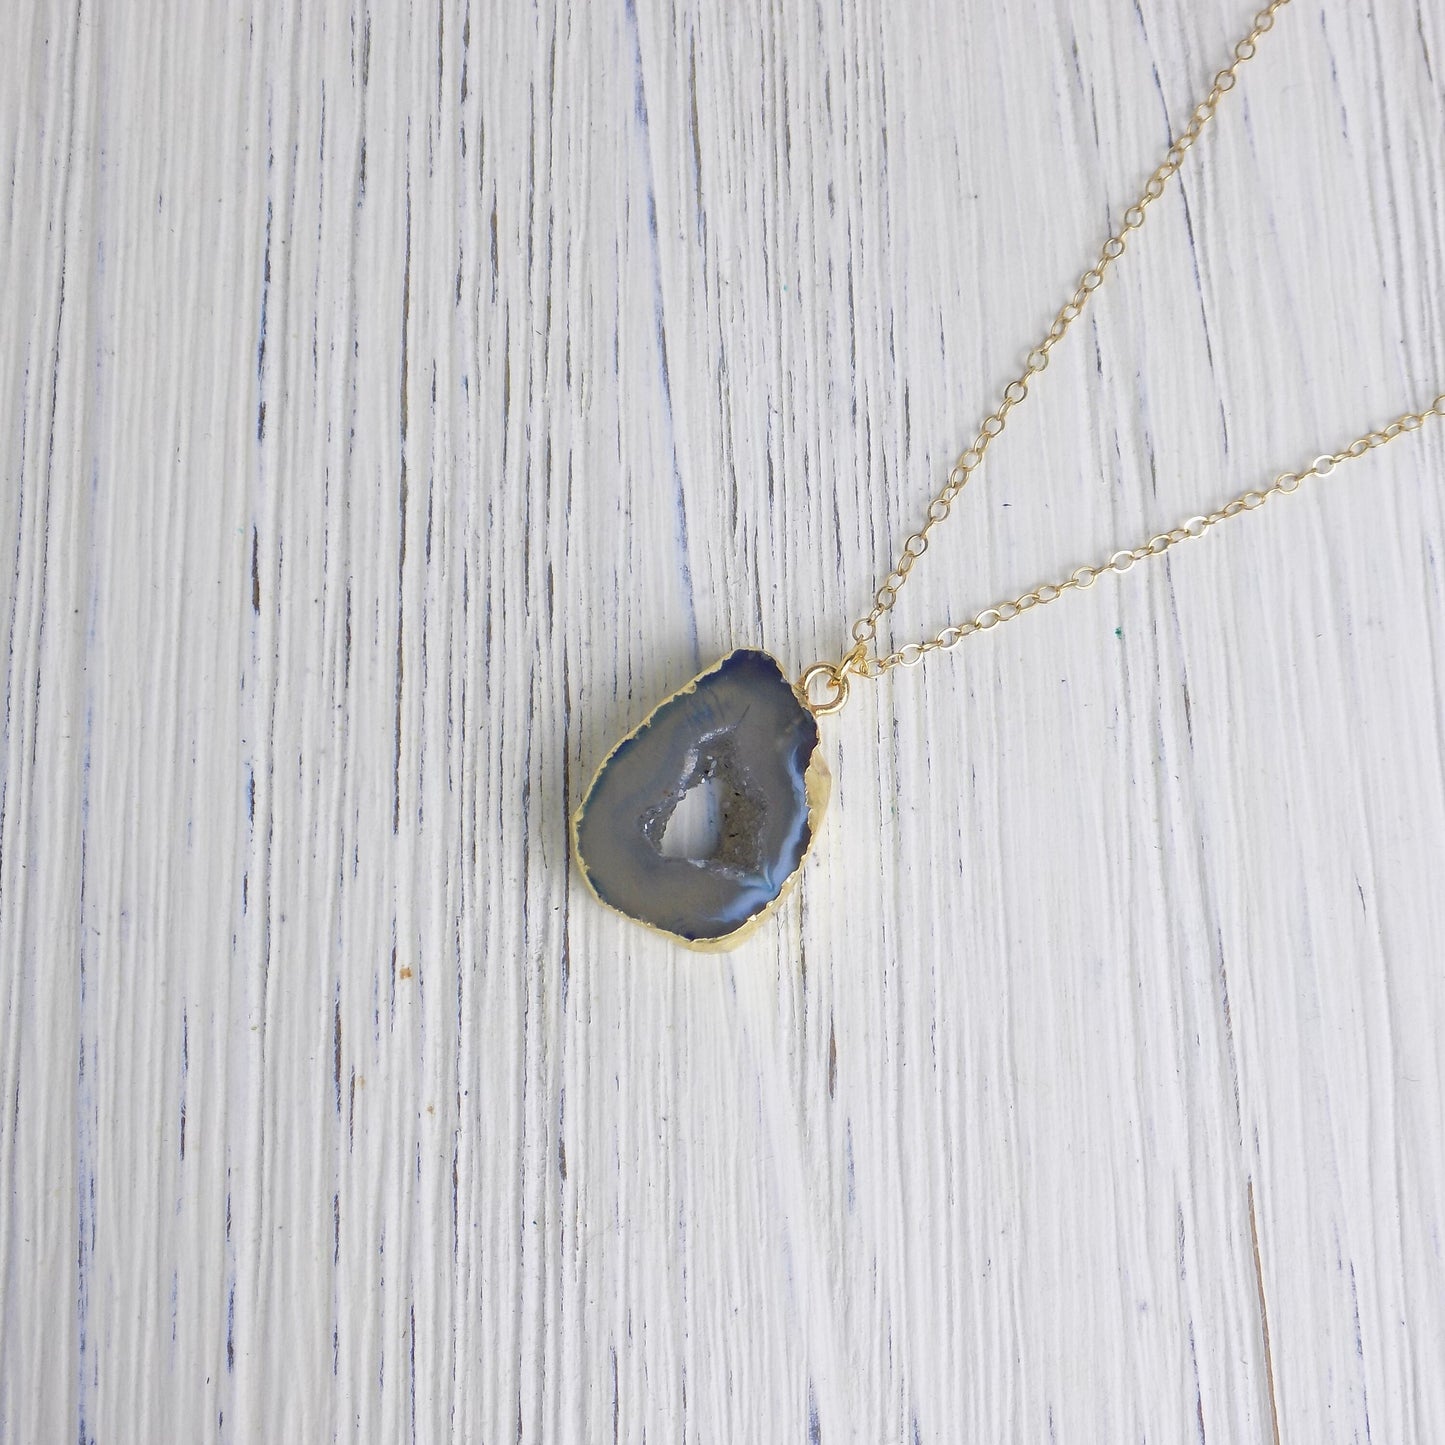 Gift For Mom, Small Geode Necklace, Small Druzy Pendant, Small Agate, Raw Crystal Necklace Gold, G9-887